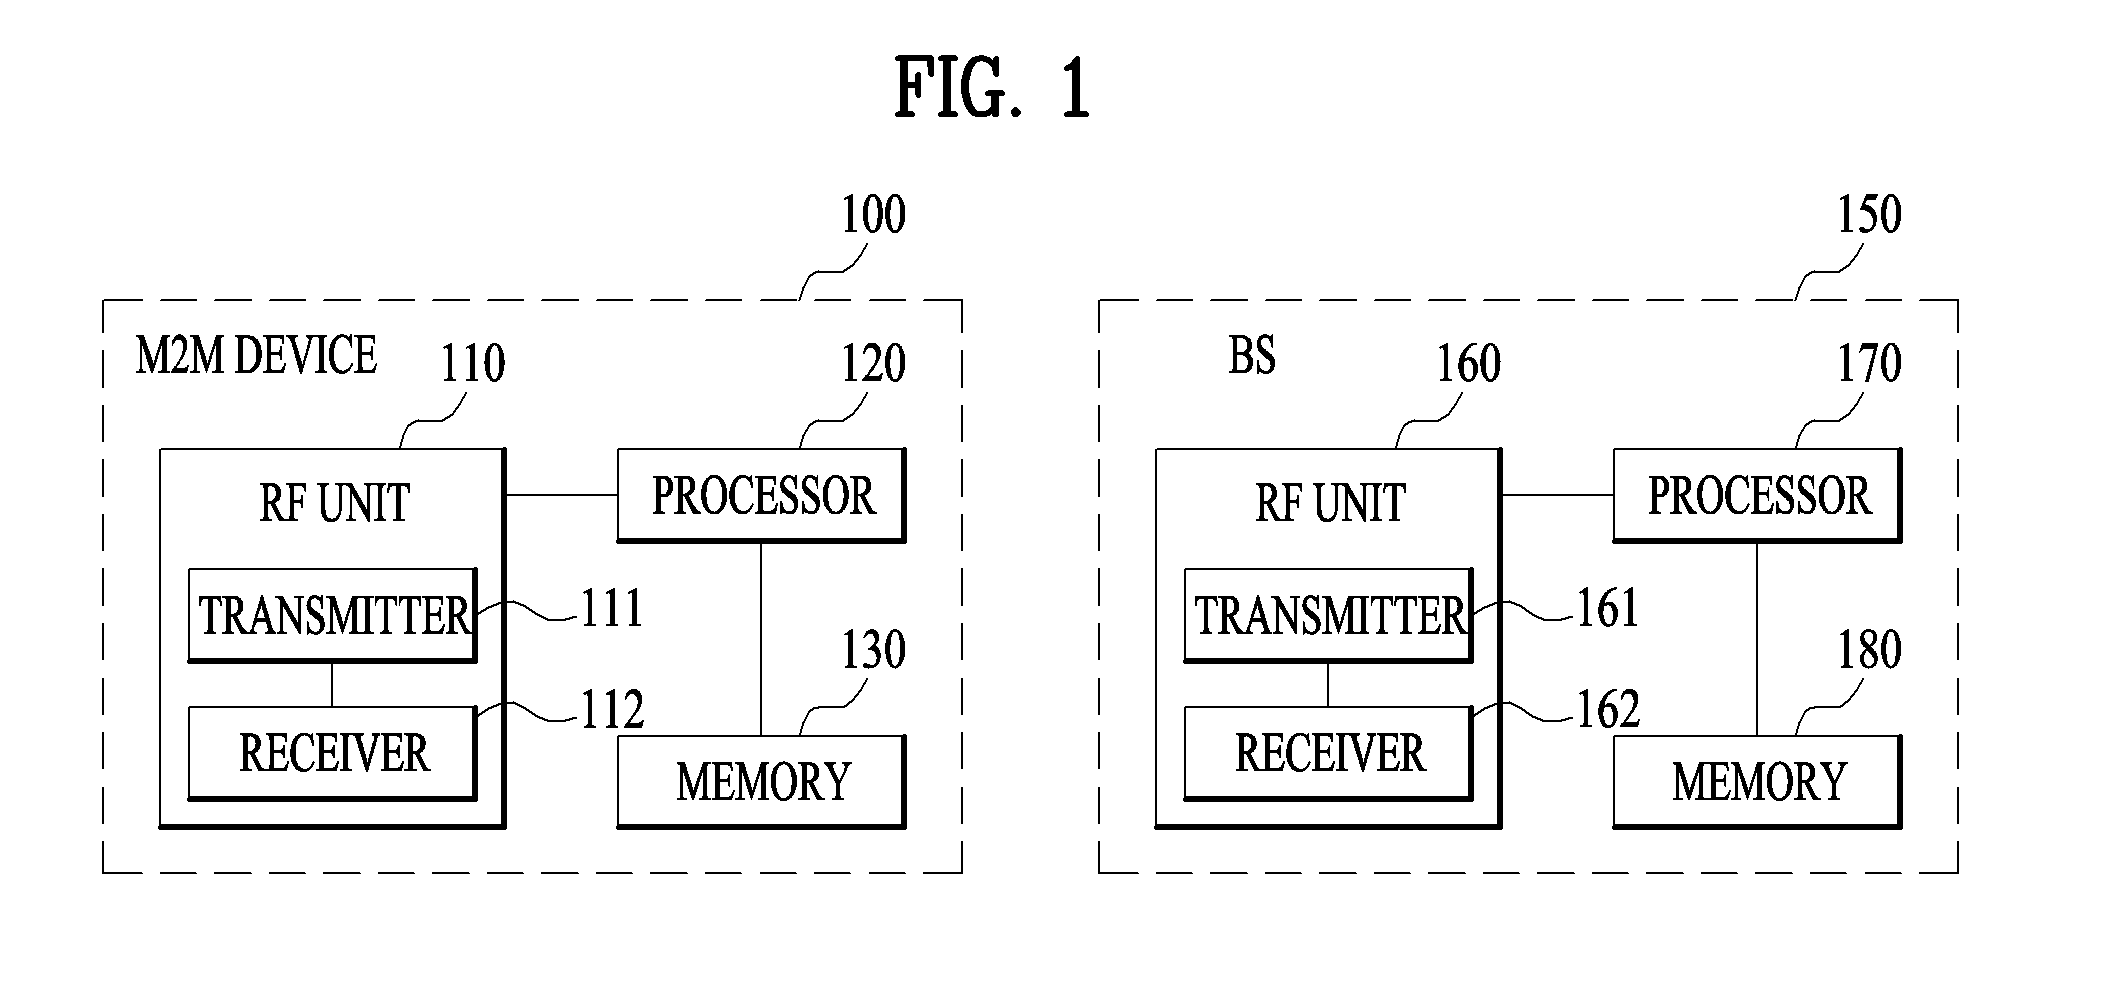 Method and apparatus for transmitting broadcasting message in wireless access system supporting m2m environment